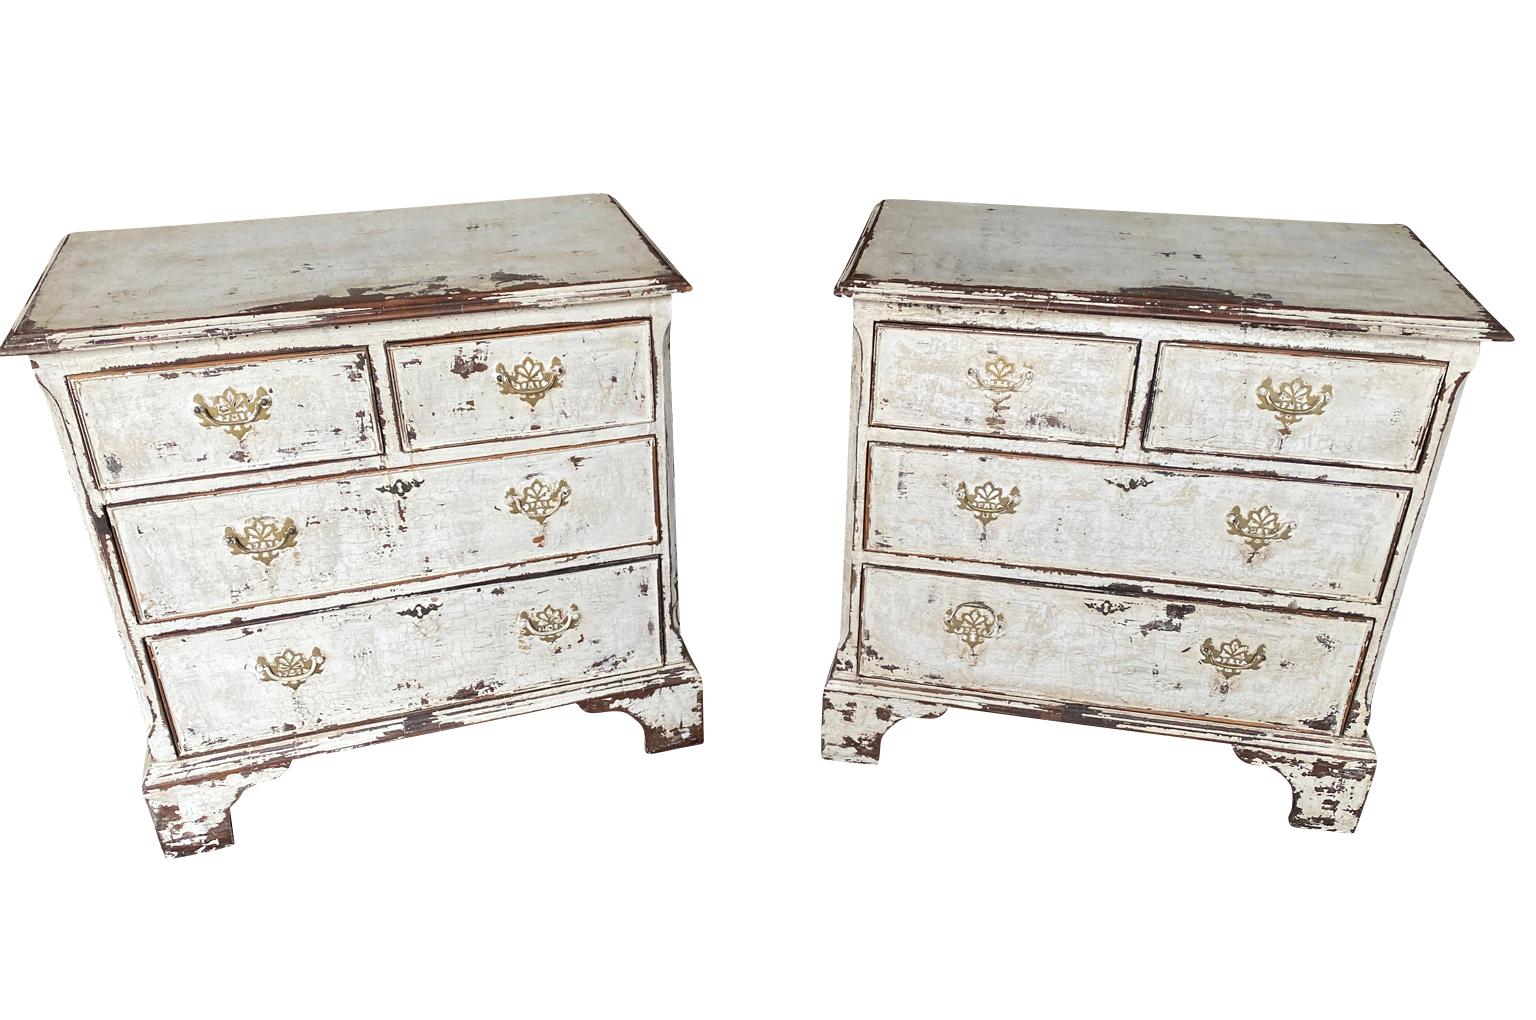 A lovely pair of later 19th century English Side Chests.  Beautifully constructed from painted wood each with 2 short drawers and 2 long drawers raised on bracket feet.  Perfect as bedside cabinets.